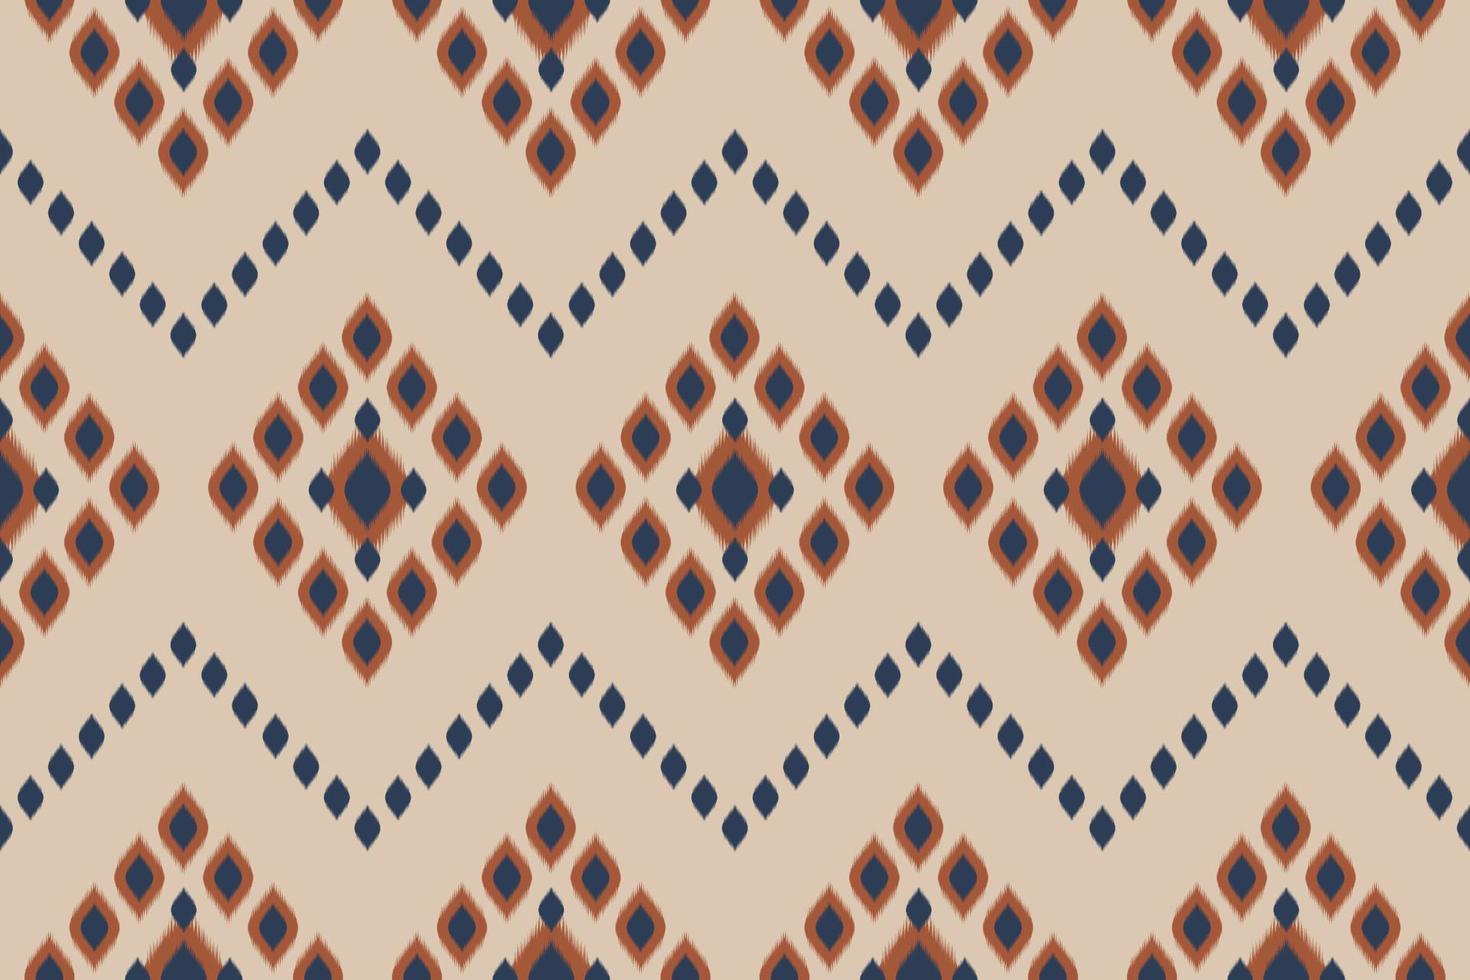 Ethnic ikat seamless pattern. Mexican striped style. Native traditional. Design for background, wallpaper, vector illustration, fabric, clothing, batik, carpet, embroidery.